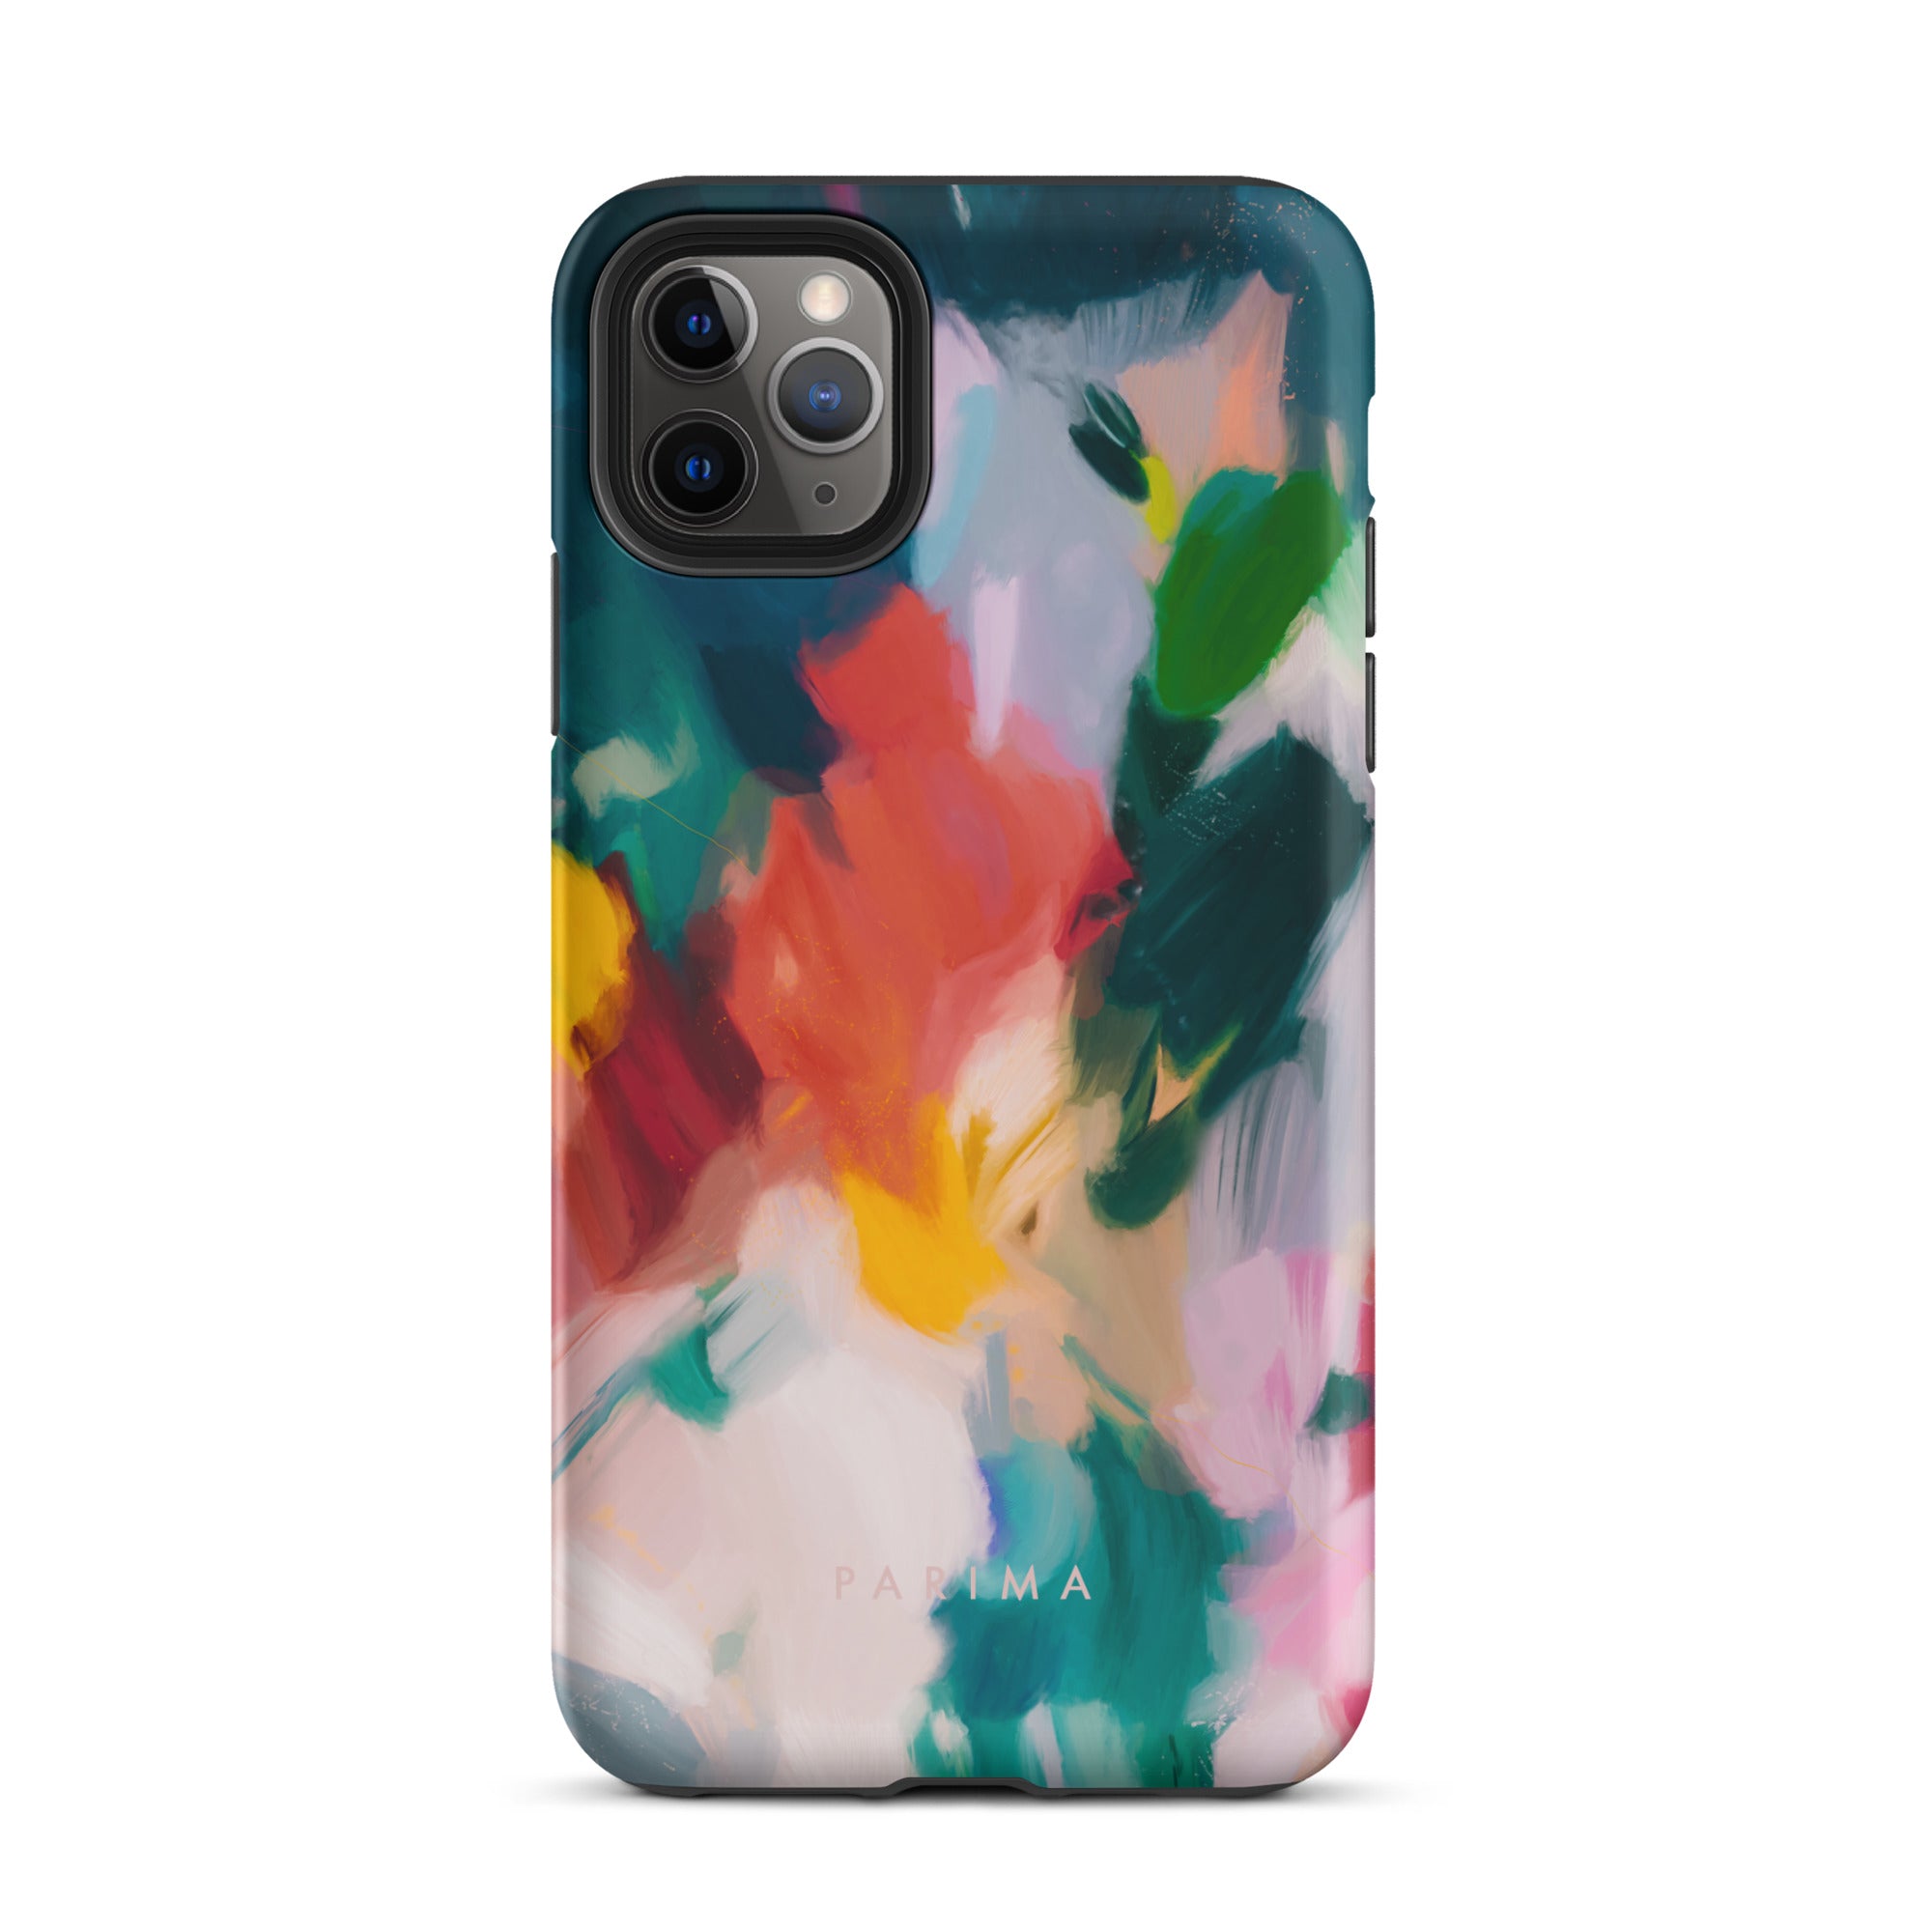 Pomme, blue and red abstract art on iPhone 11 Pro Max tough case by Parima Studio